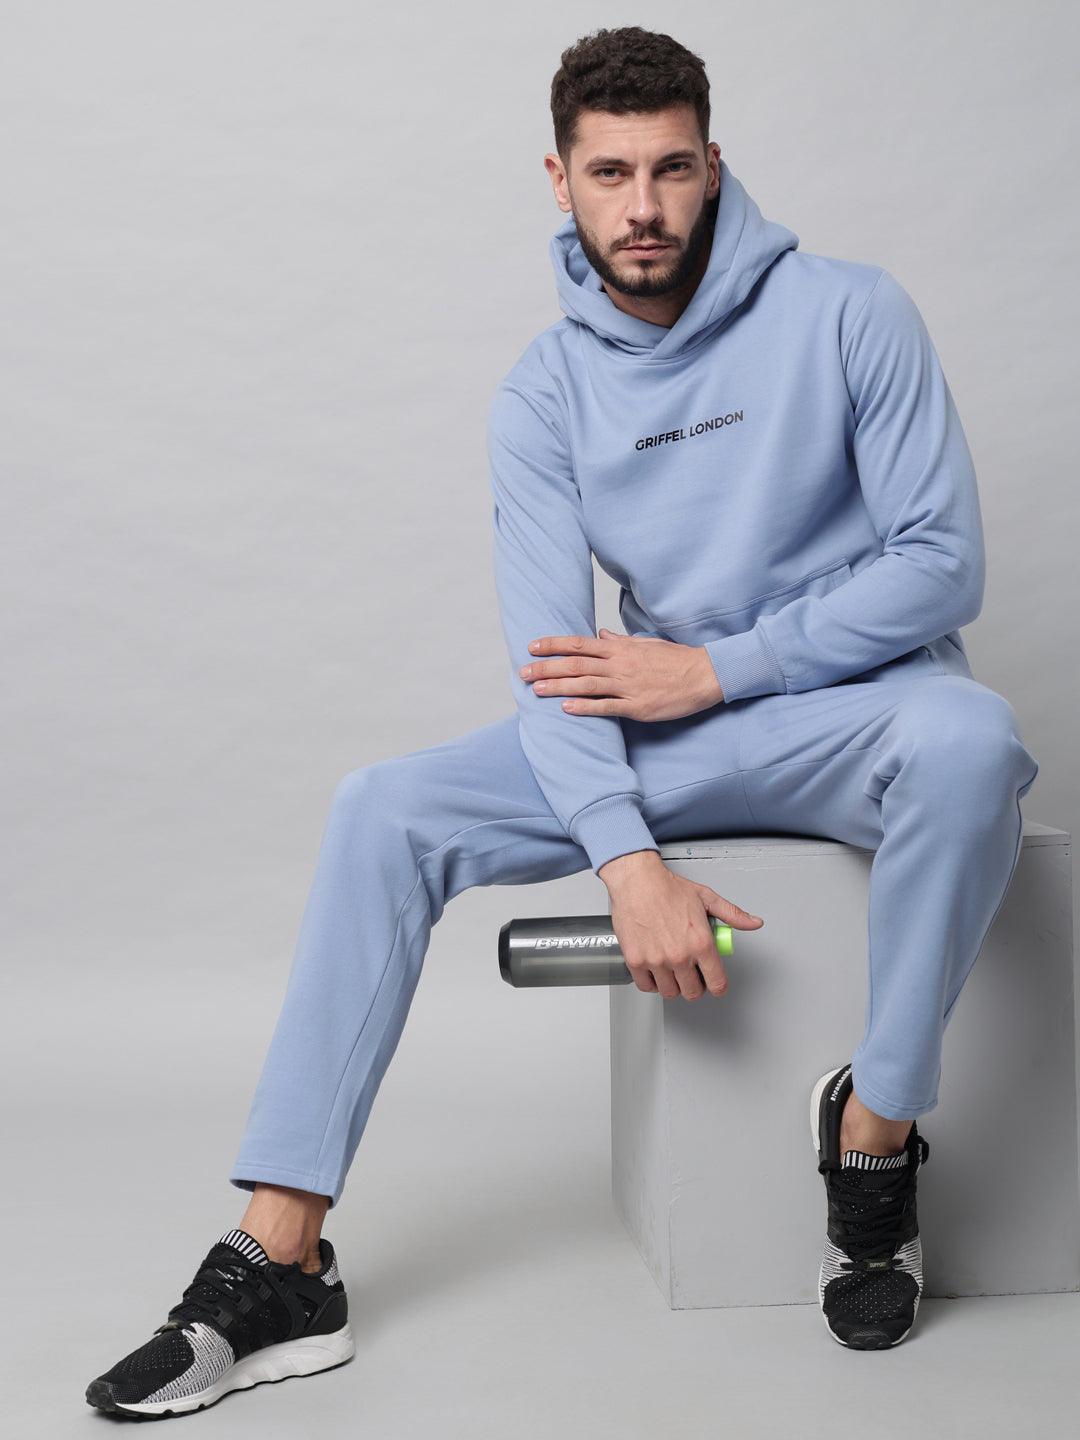 Griffel Men's Front Logo Solid Fleece Basic Hoodie and Joggers Full set Sky Blue Tracksuit - griffel